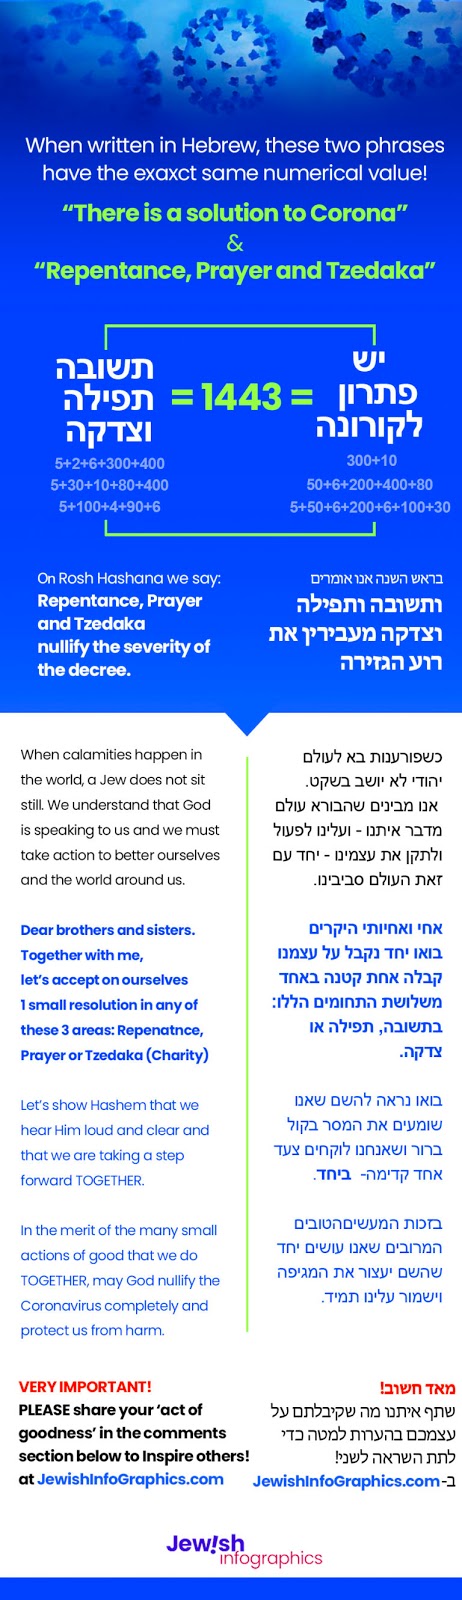 The Solution to the Coronavirus!! יש פתרון לקורונה<br /> Repentance, Prayer and Tzedakah - Teshuvah, Tefillah, Tzedakah<br /> http://jewishinfographics.com/2020/03/05/the-solution-to-the-coronavirus-%d7%99%d7%a9-%d7%a4%d7%aa%d7%a8%d7%95%d7%9f-%d7%9c%d7%a7%d7%95%d7%a8%d7%95%d7%a0%d7%94/<br /> Please take upon yourself something for improvement in one of these 3 areas for the protection of Klal Yisrael – and share it with us in the comments below to inspire others!<br /> קחו על עצמכם קבלה קטנה באחד מ3- תחומים אלו להצלת כלל ישראל – ושתף איתנו בתגובות למטה